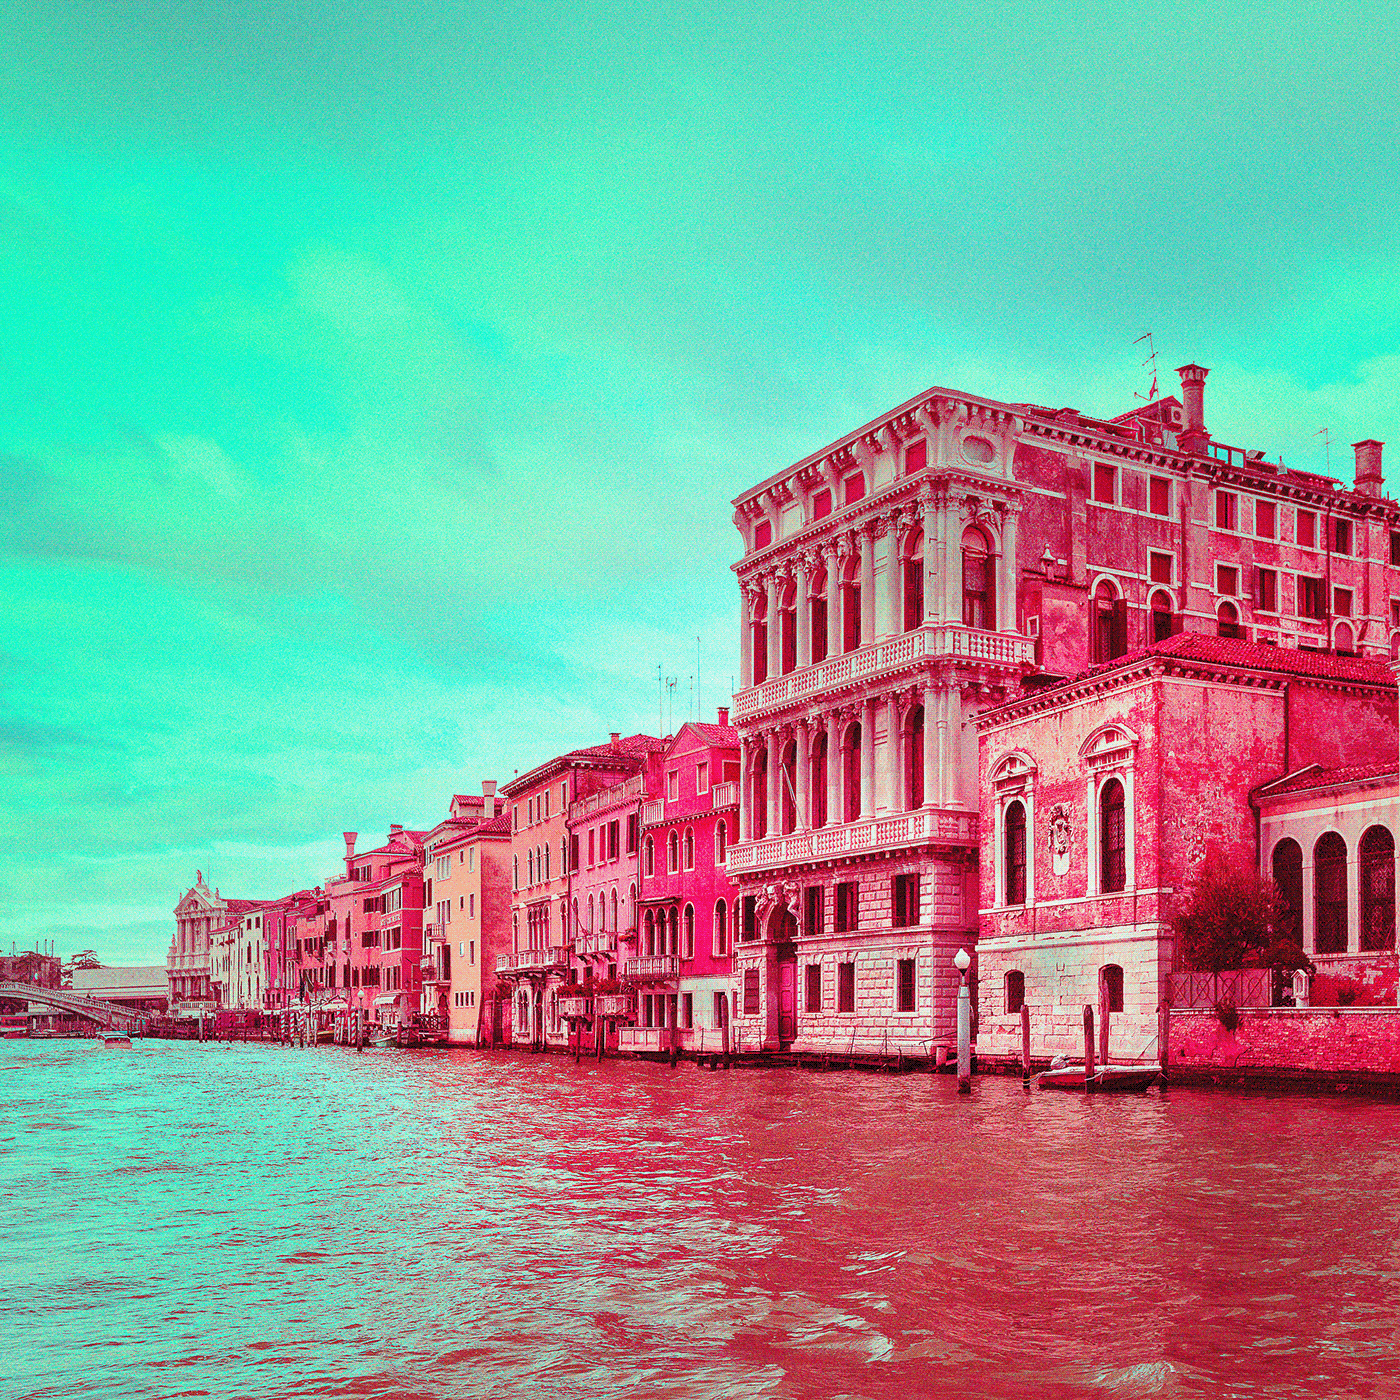 WATERWAY is the colored image for the alternative process. The location is Venice, ITALY.
